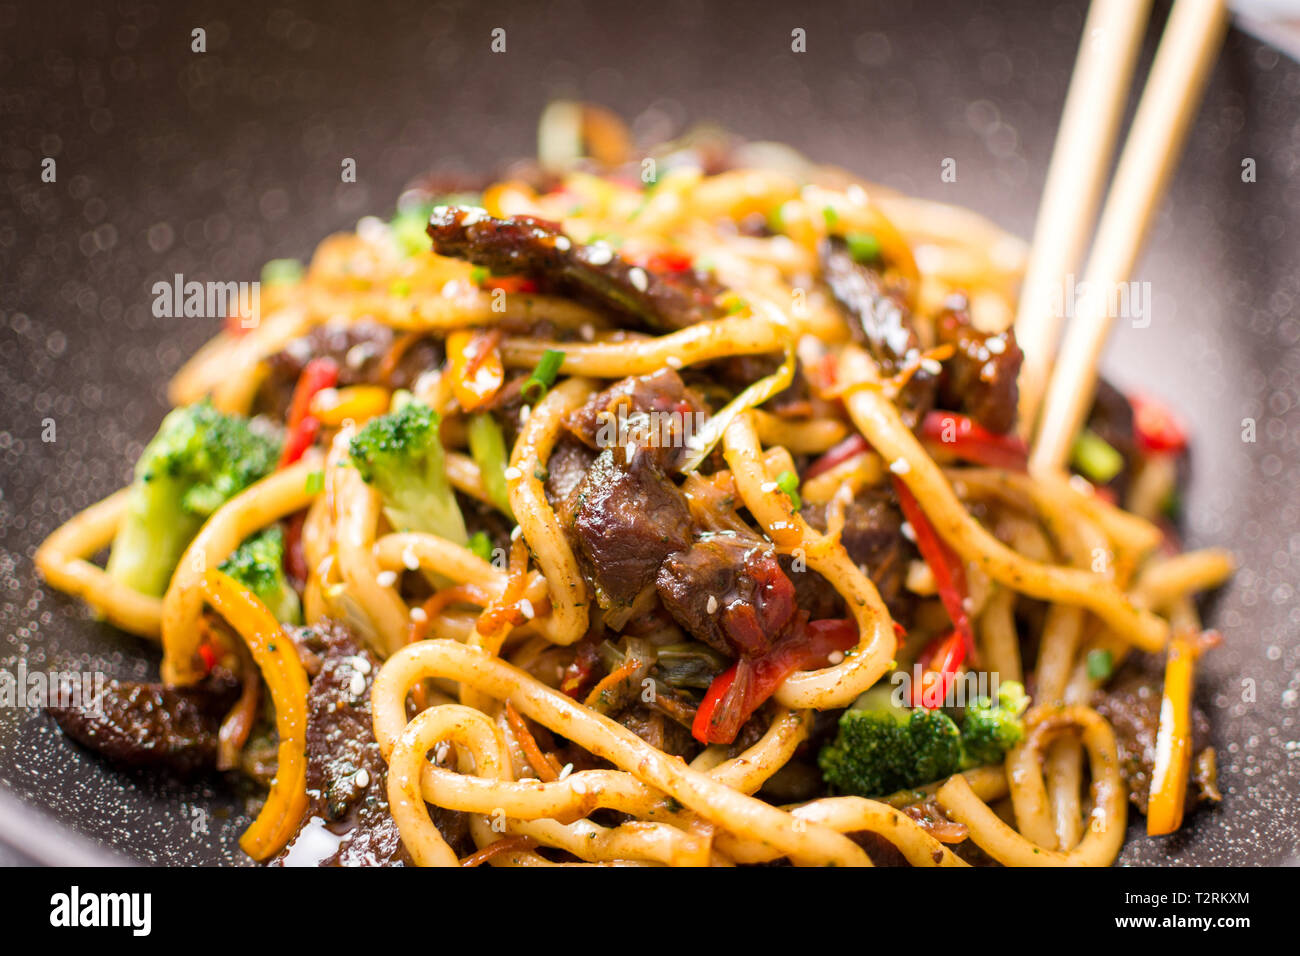 Udon Stir-Fry Noodles with Beef and Vegetables in Wok Pan on Dark  Background Stock Photo - Alamy